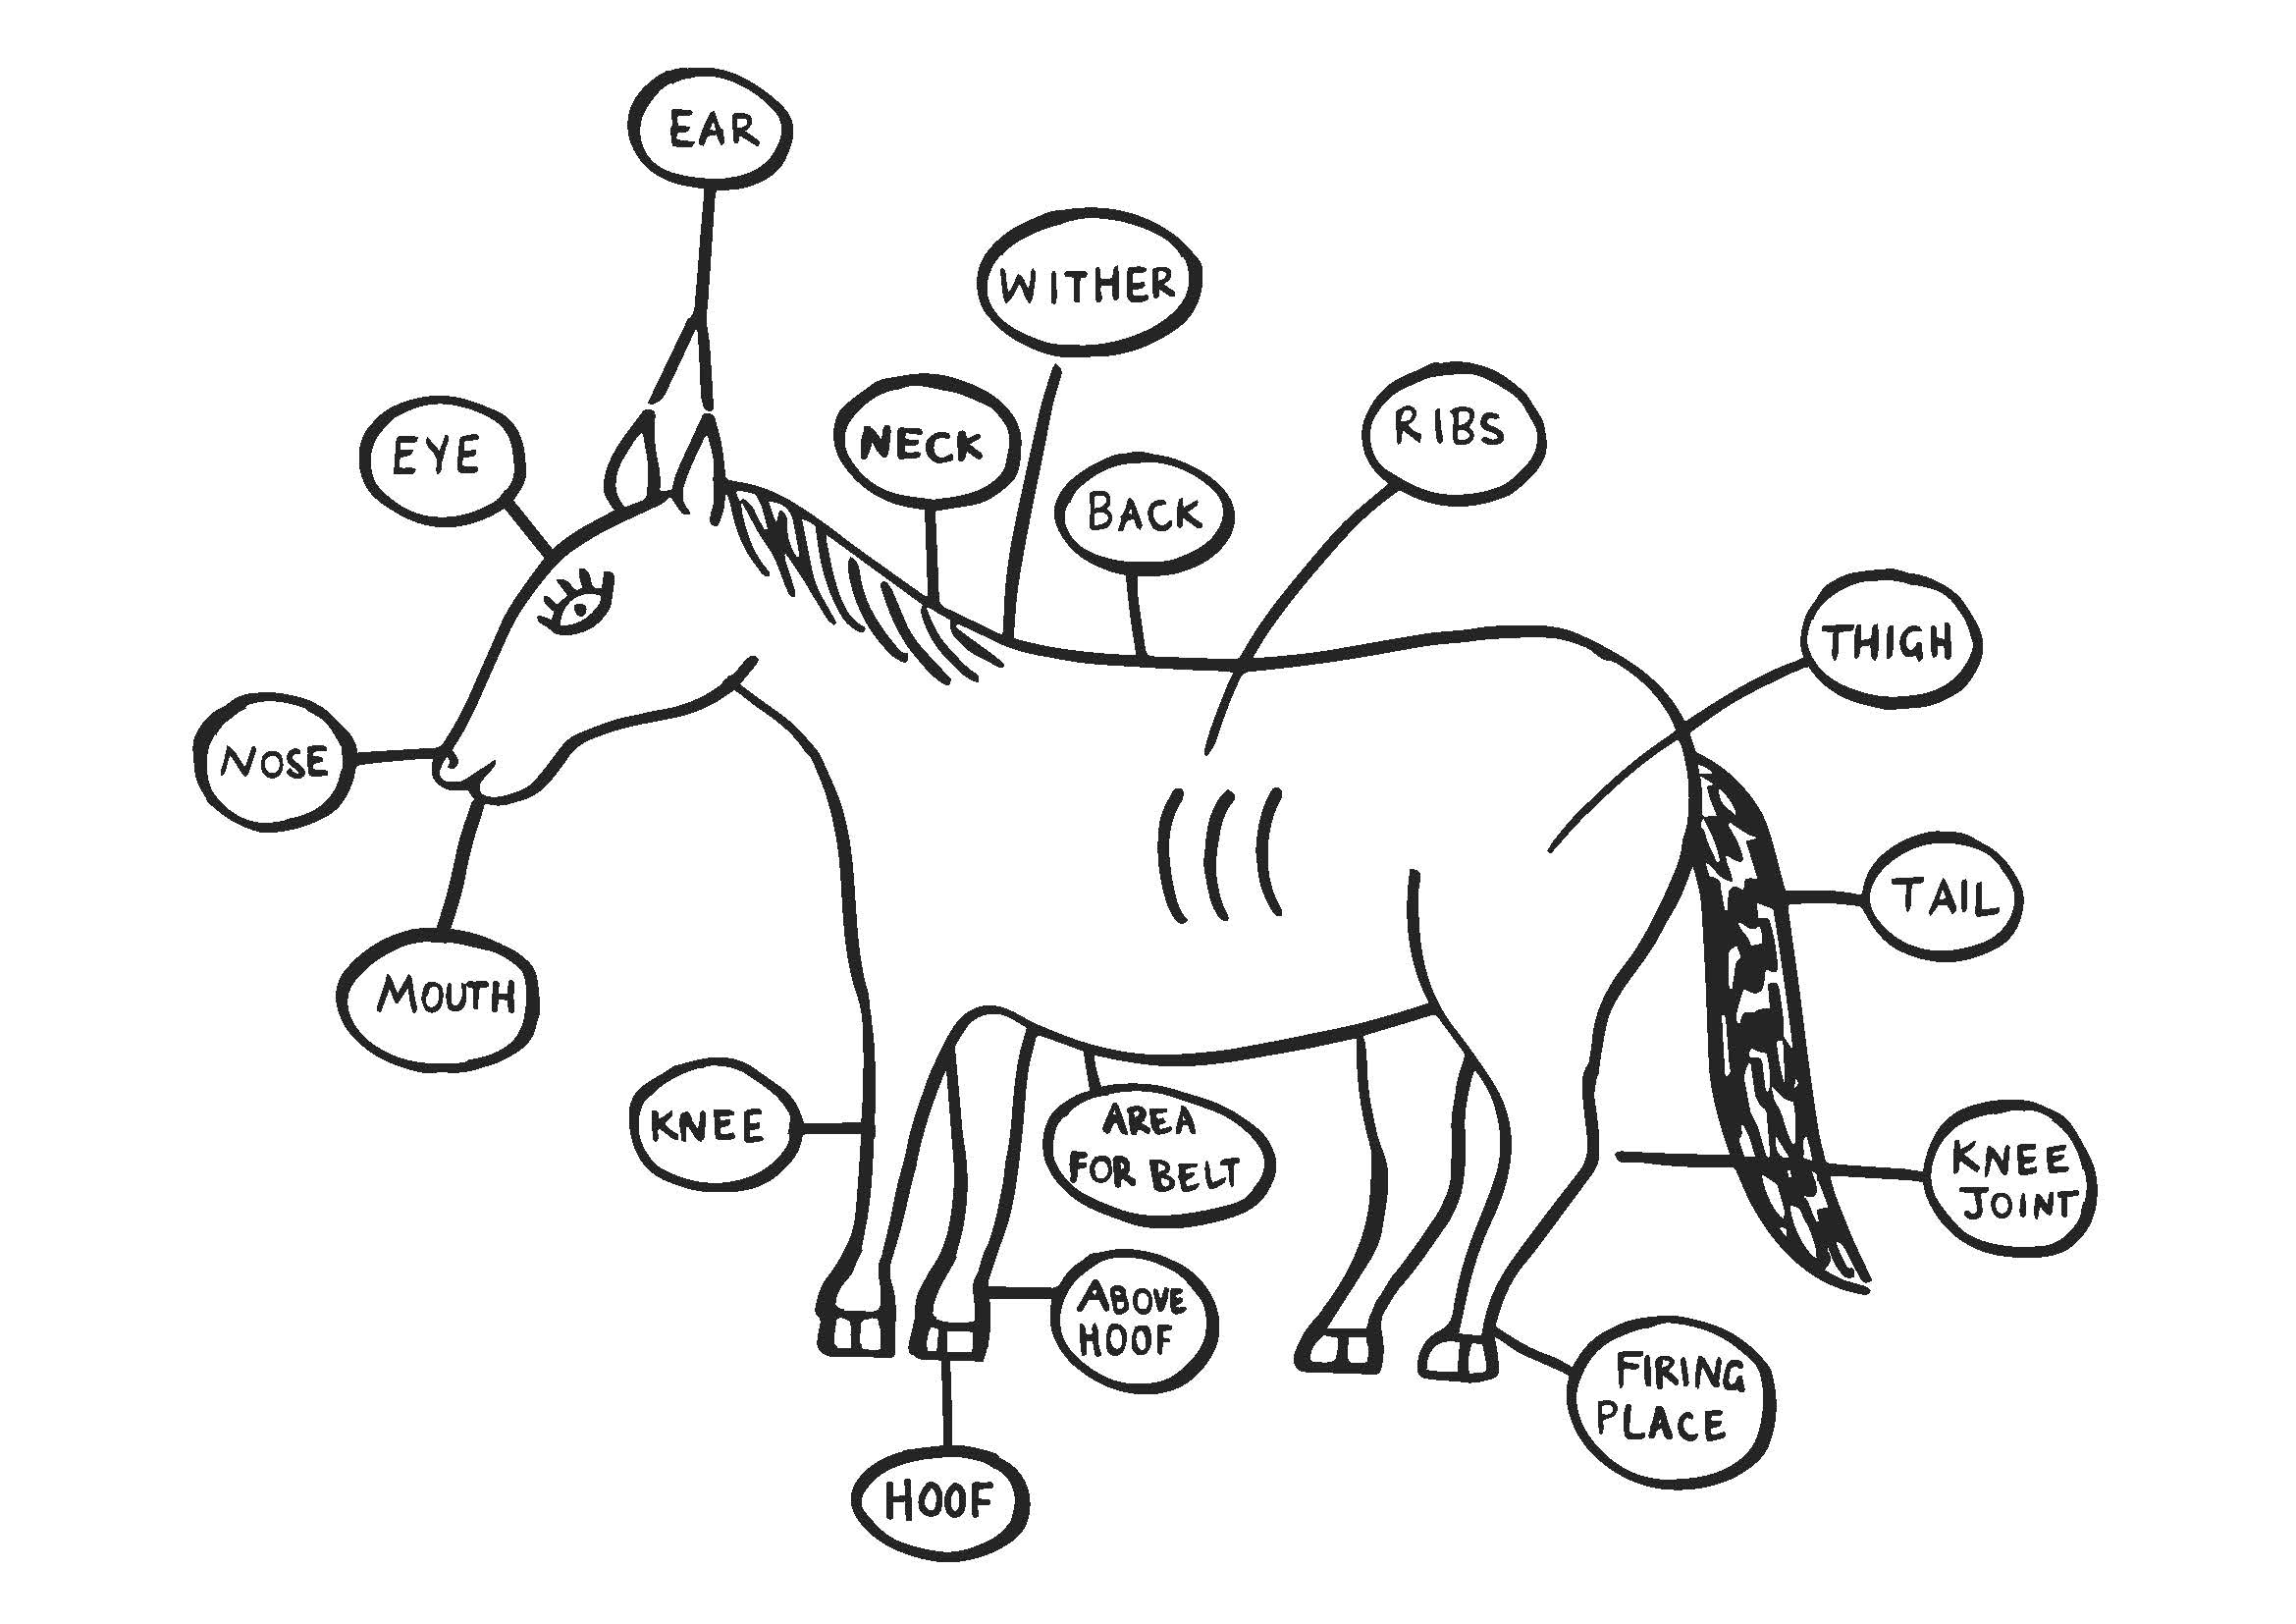 Figure T20a Simple animal body parts map of a working horse